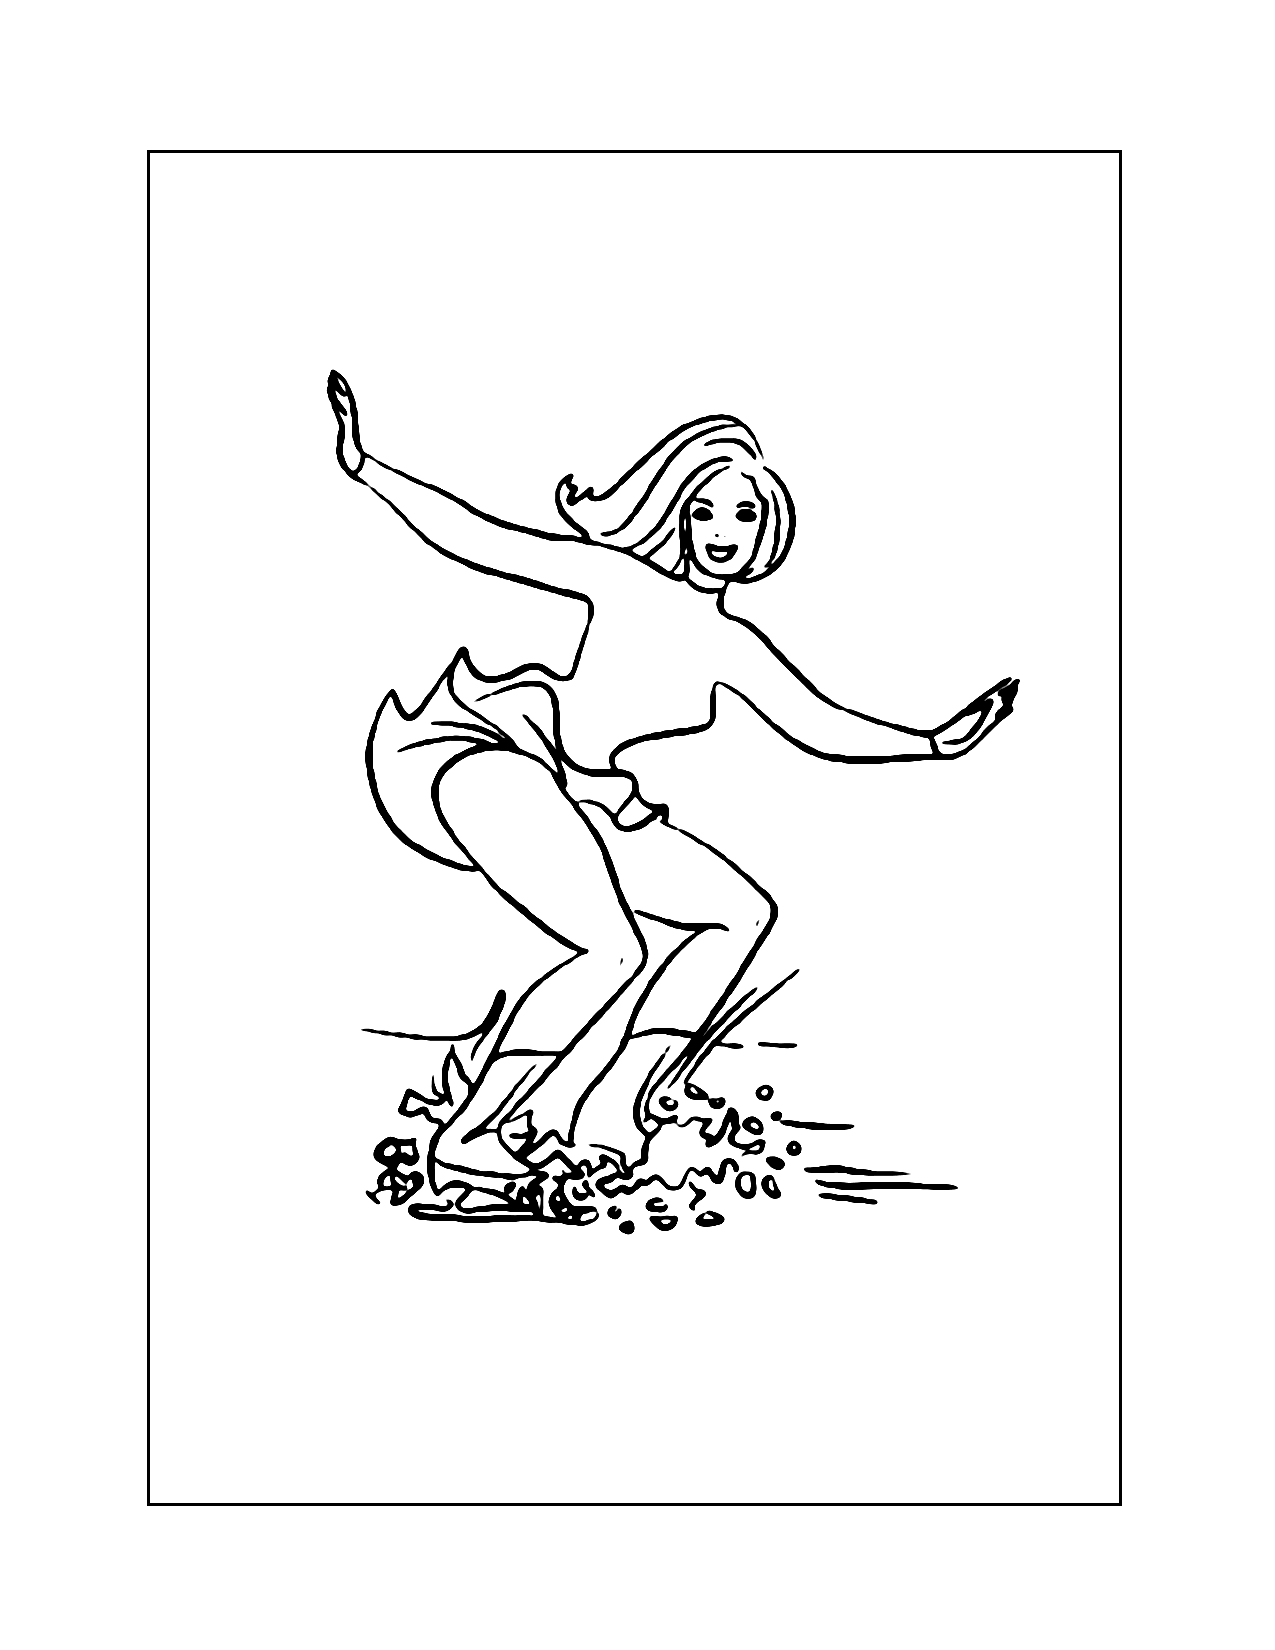 Figure Skating Coloring Page